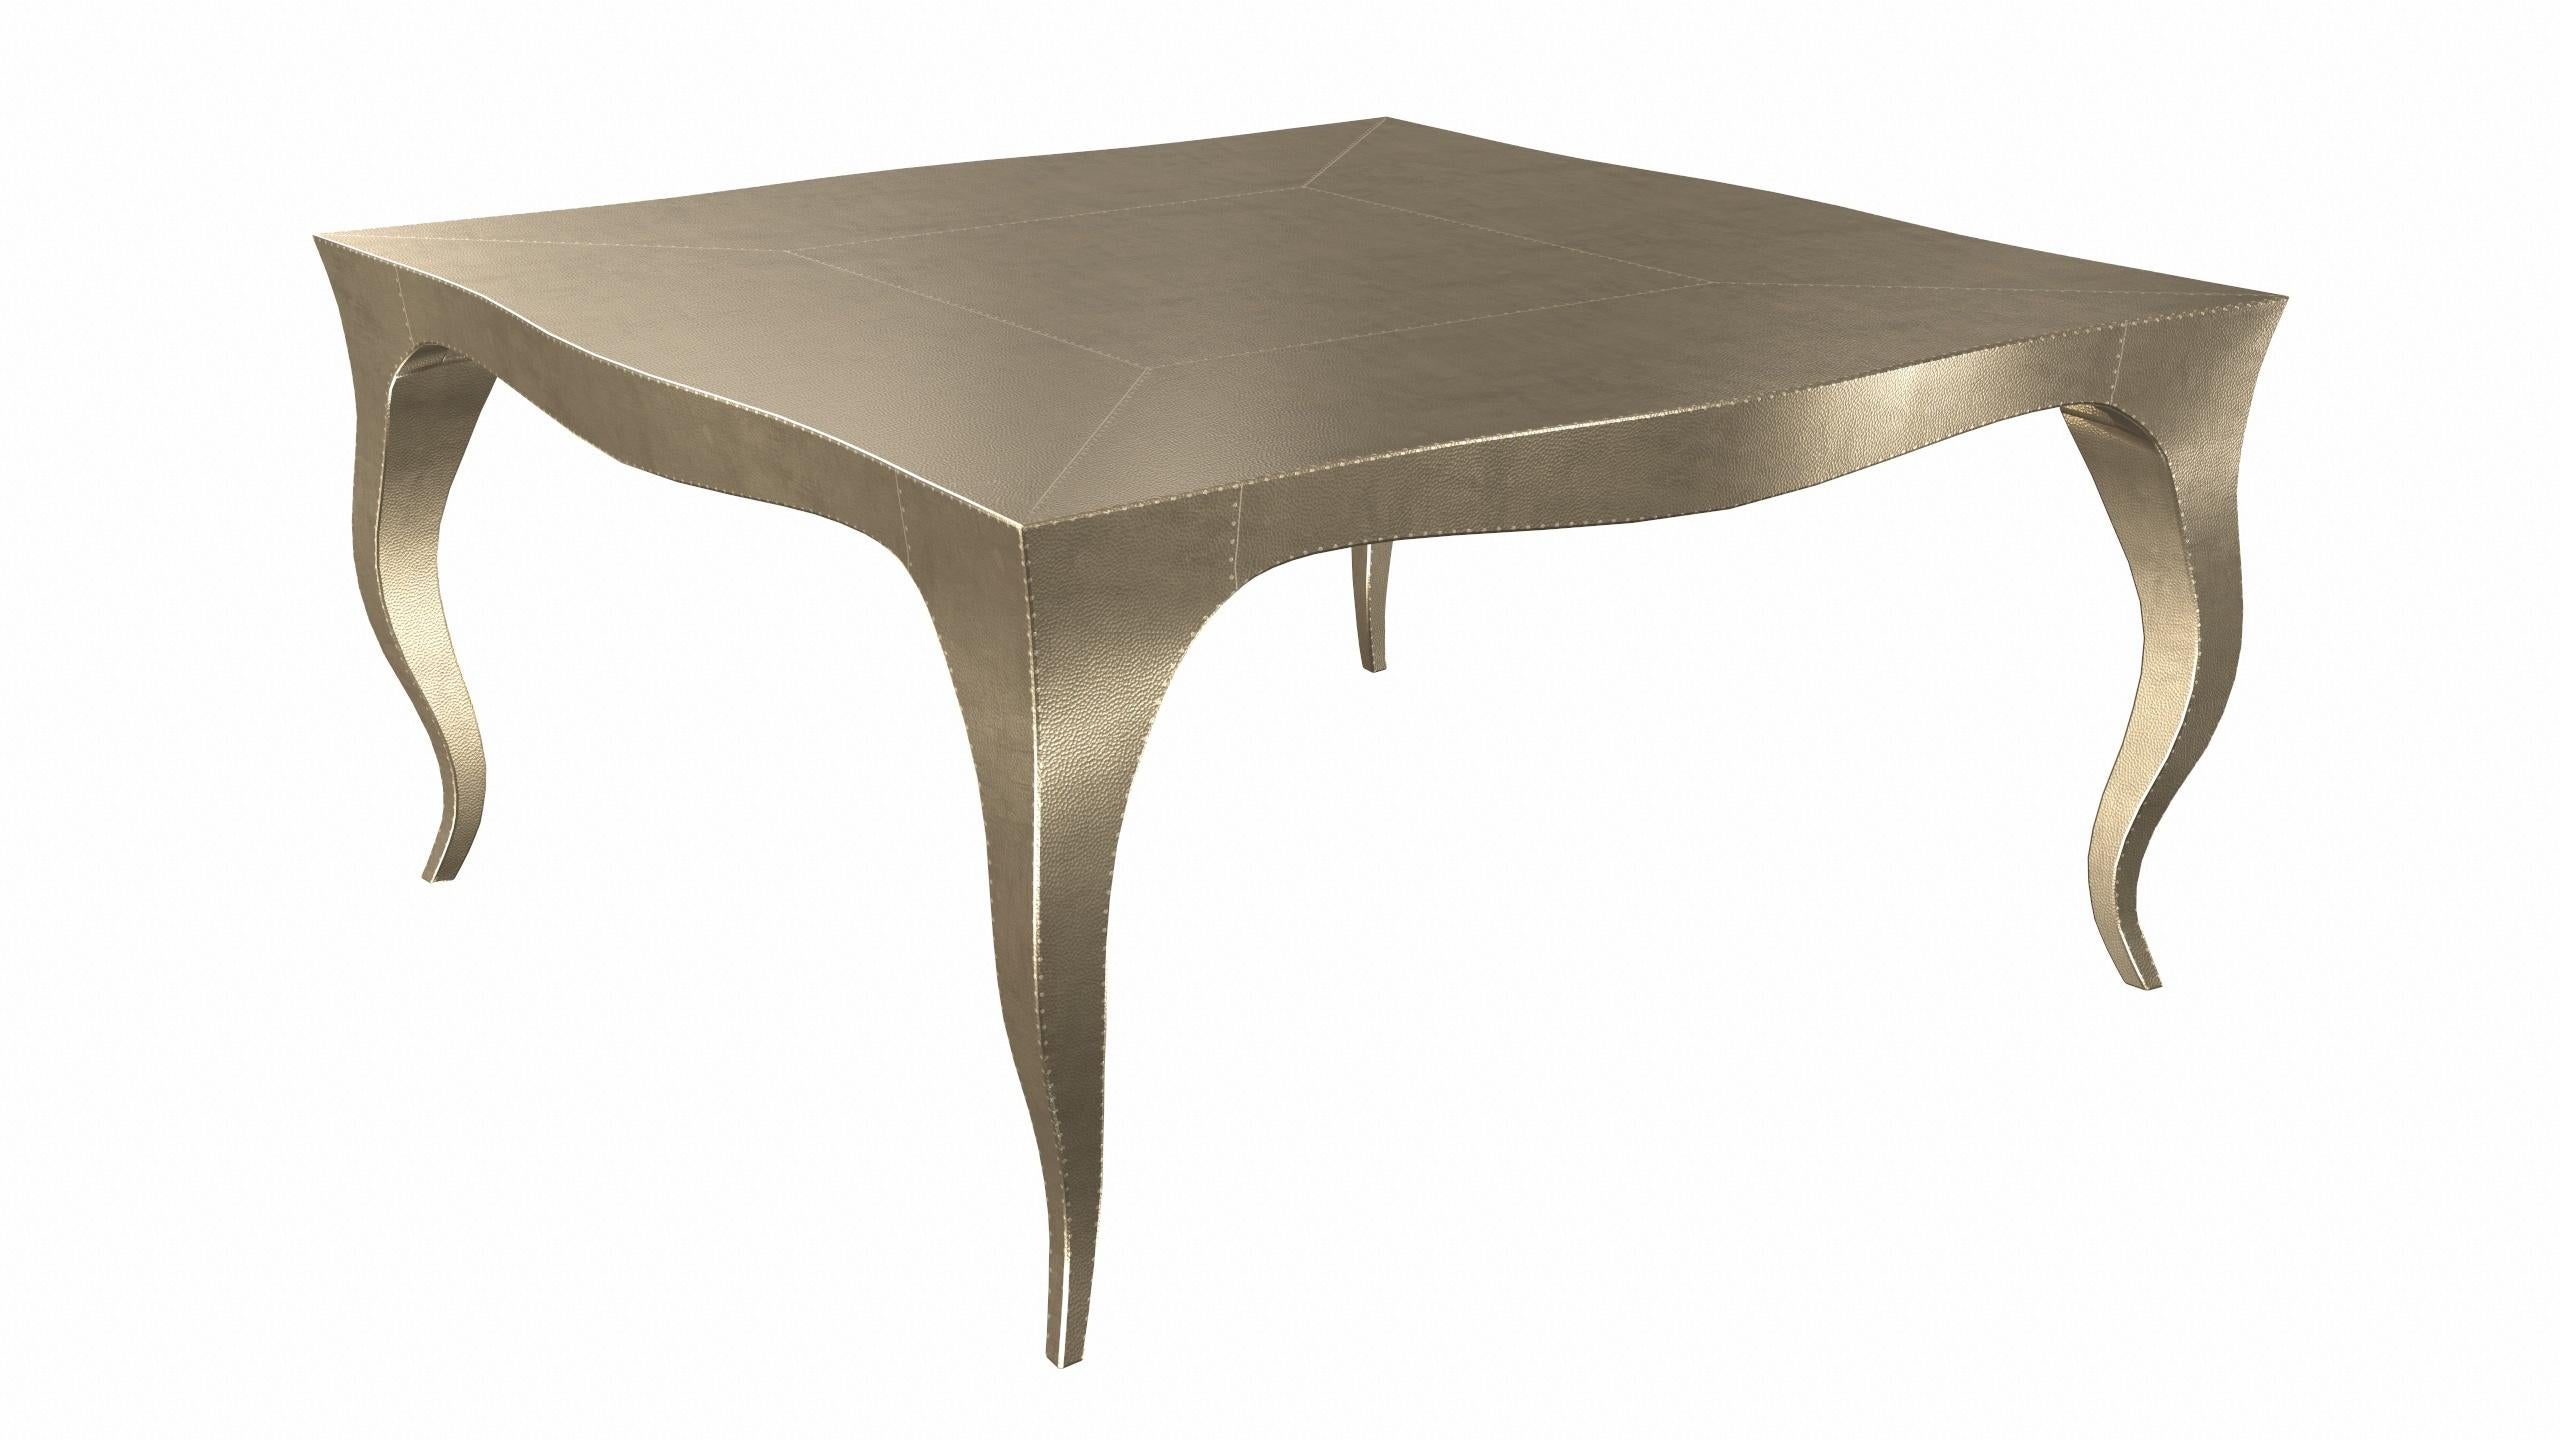 Contemporary Louise Art Deco Nesting Tables Mid. Hammered Brass 18.5x18.5x10 inch by Paul M. For Sale